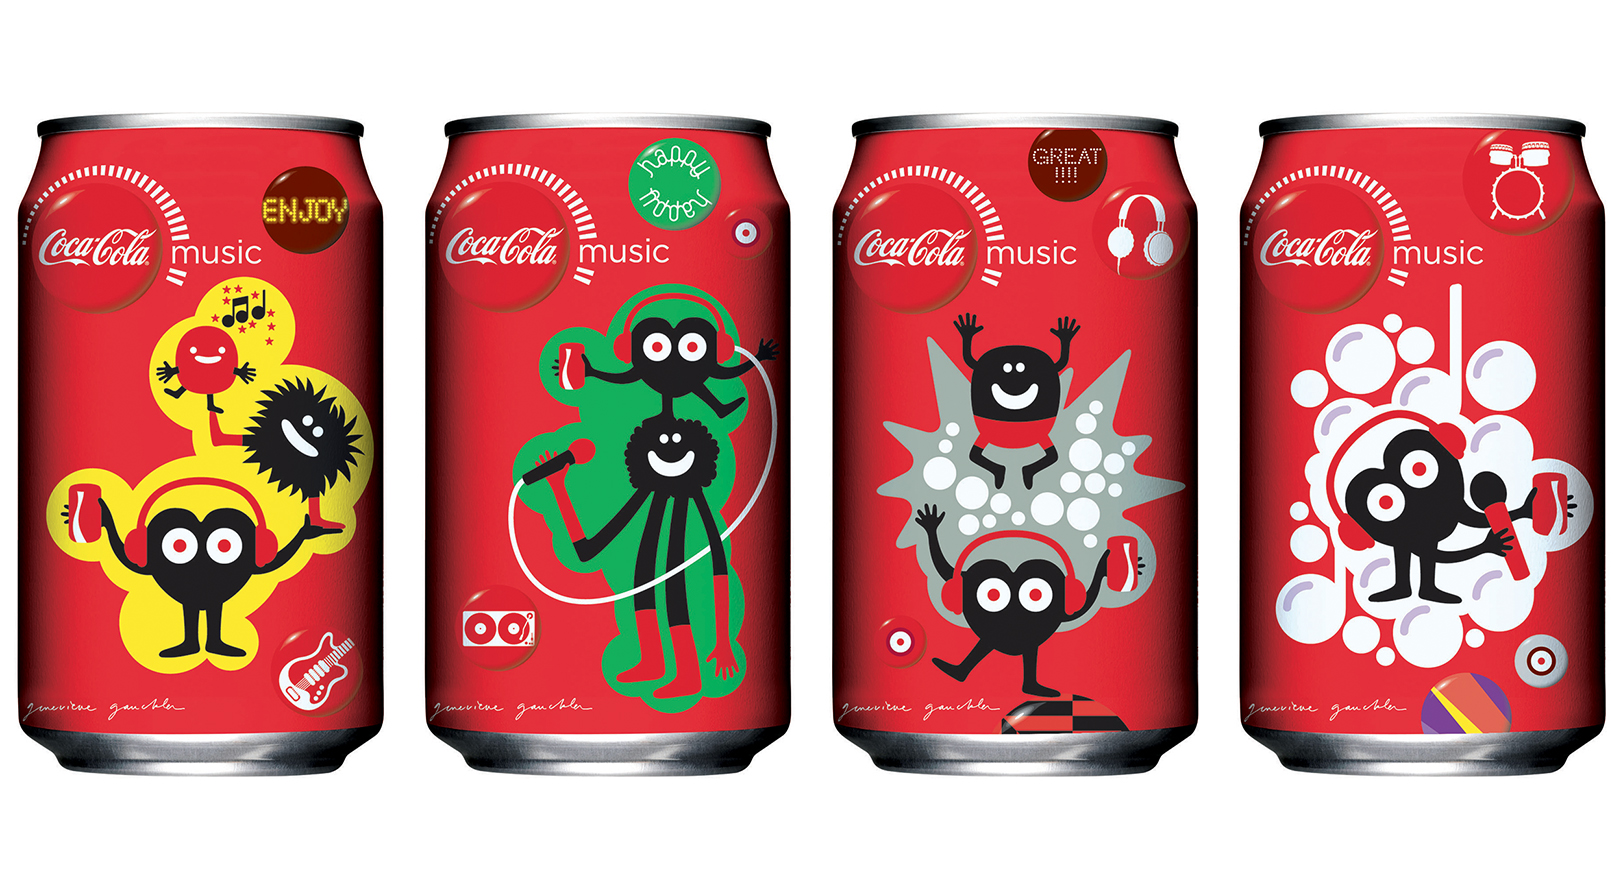 Product Licensing<br /><strong>Chocoolate x Coca Cola</strong>